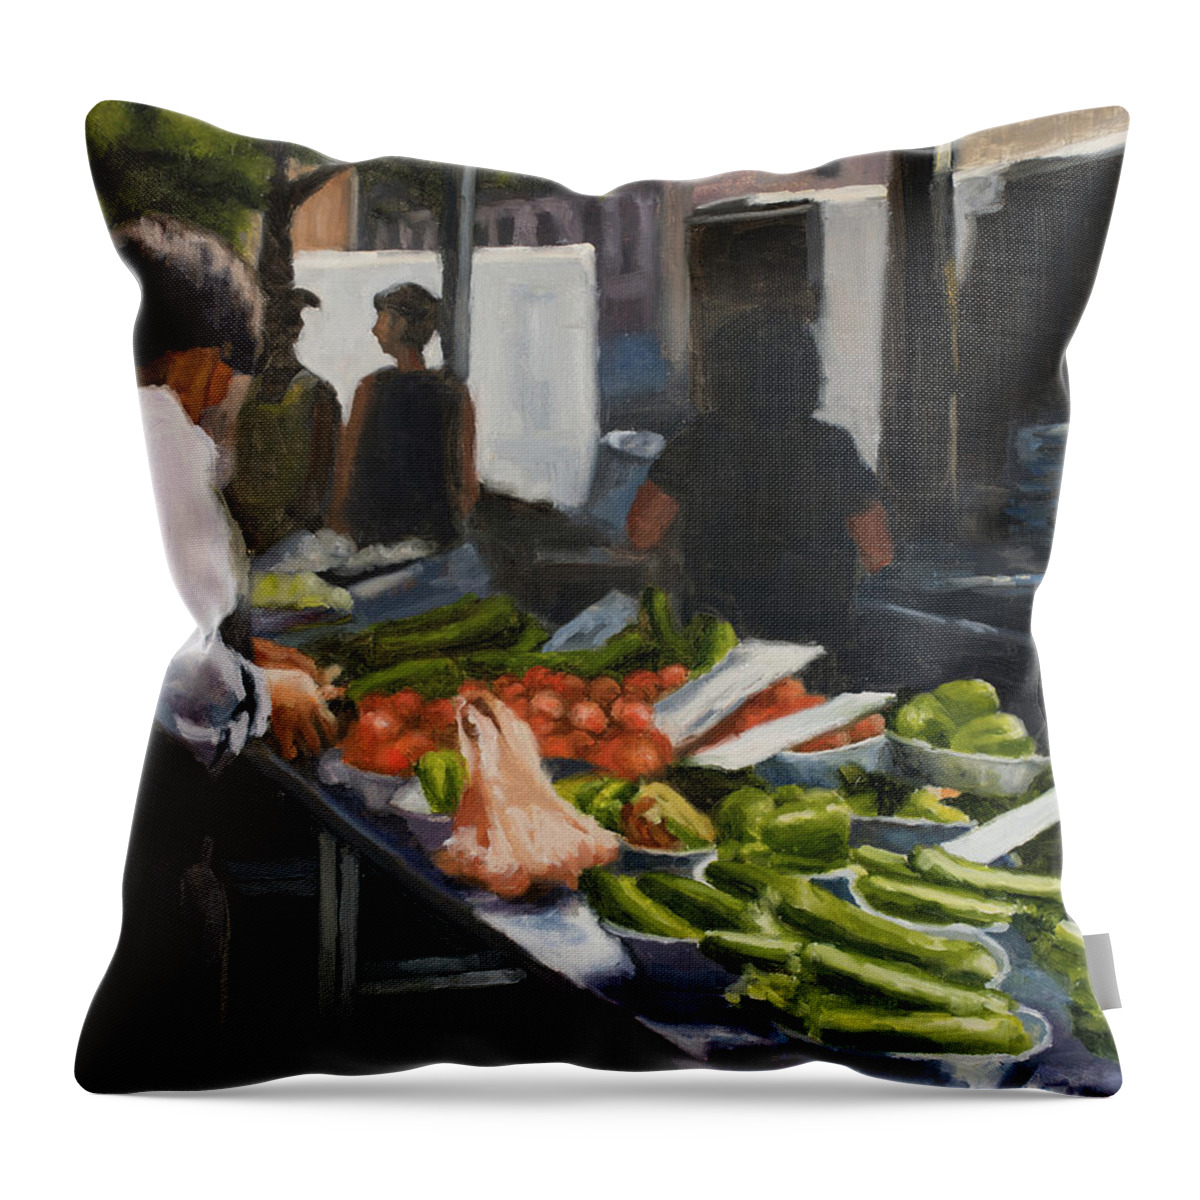 Marketplace Throw Pillow featuring the painting The Marketplace by Tate Hamilton